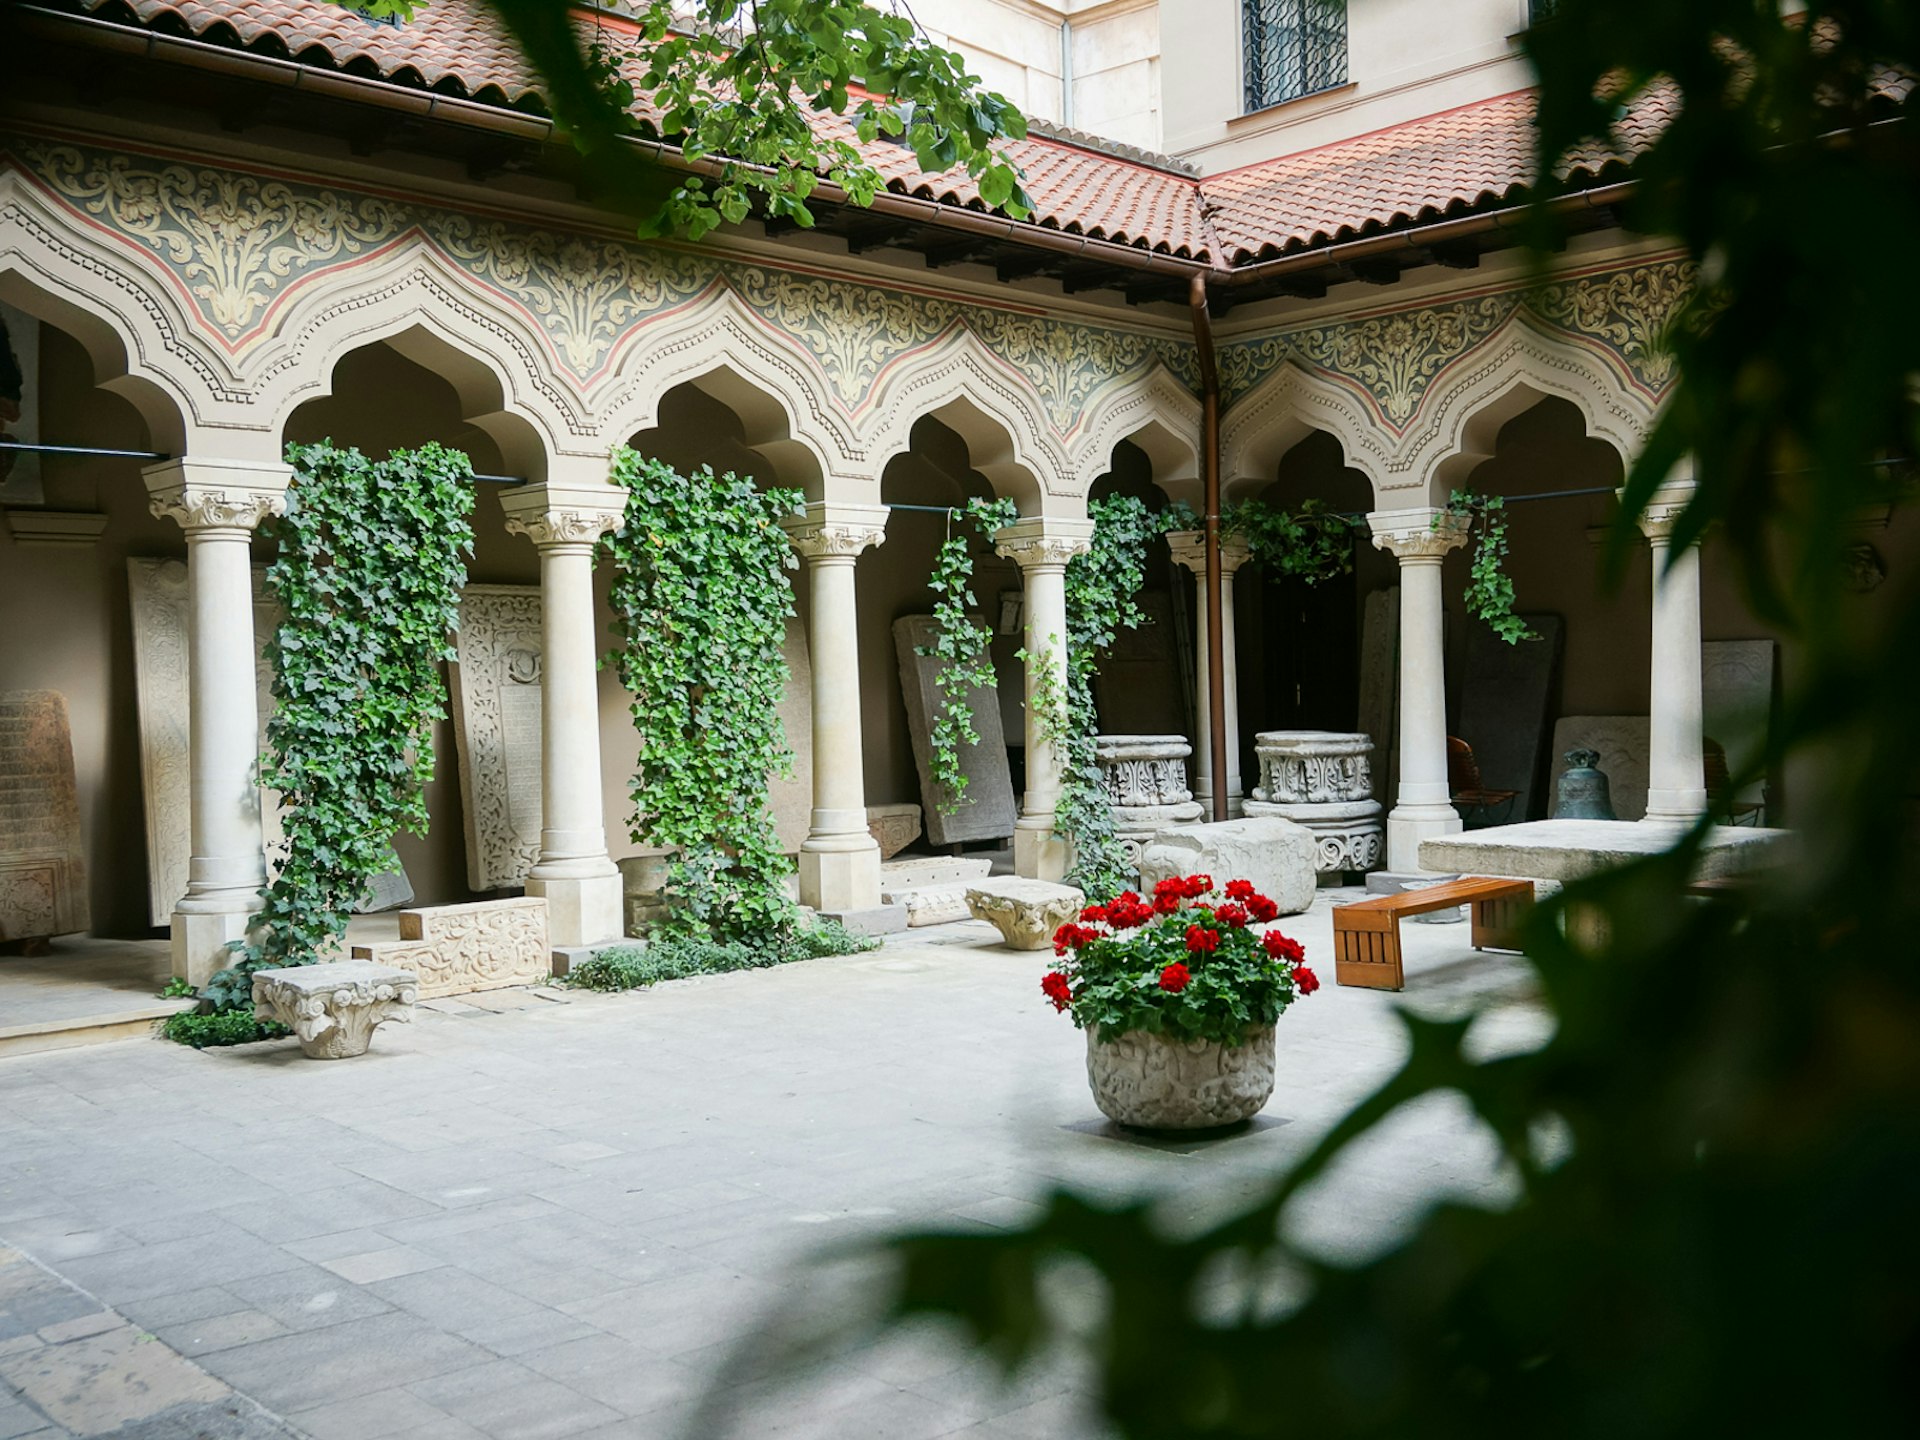 The courtyard of Stavropoleos Church © Monica Suma / Lonely Planet